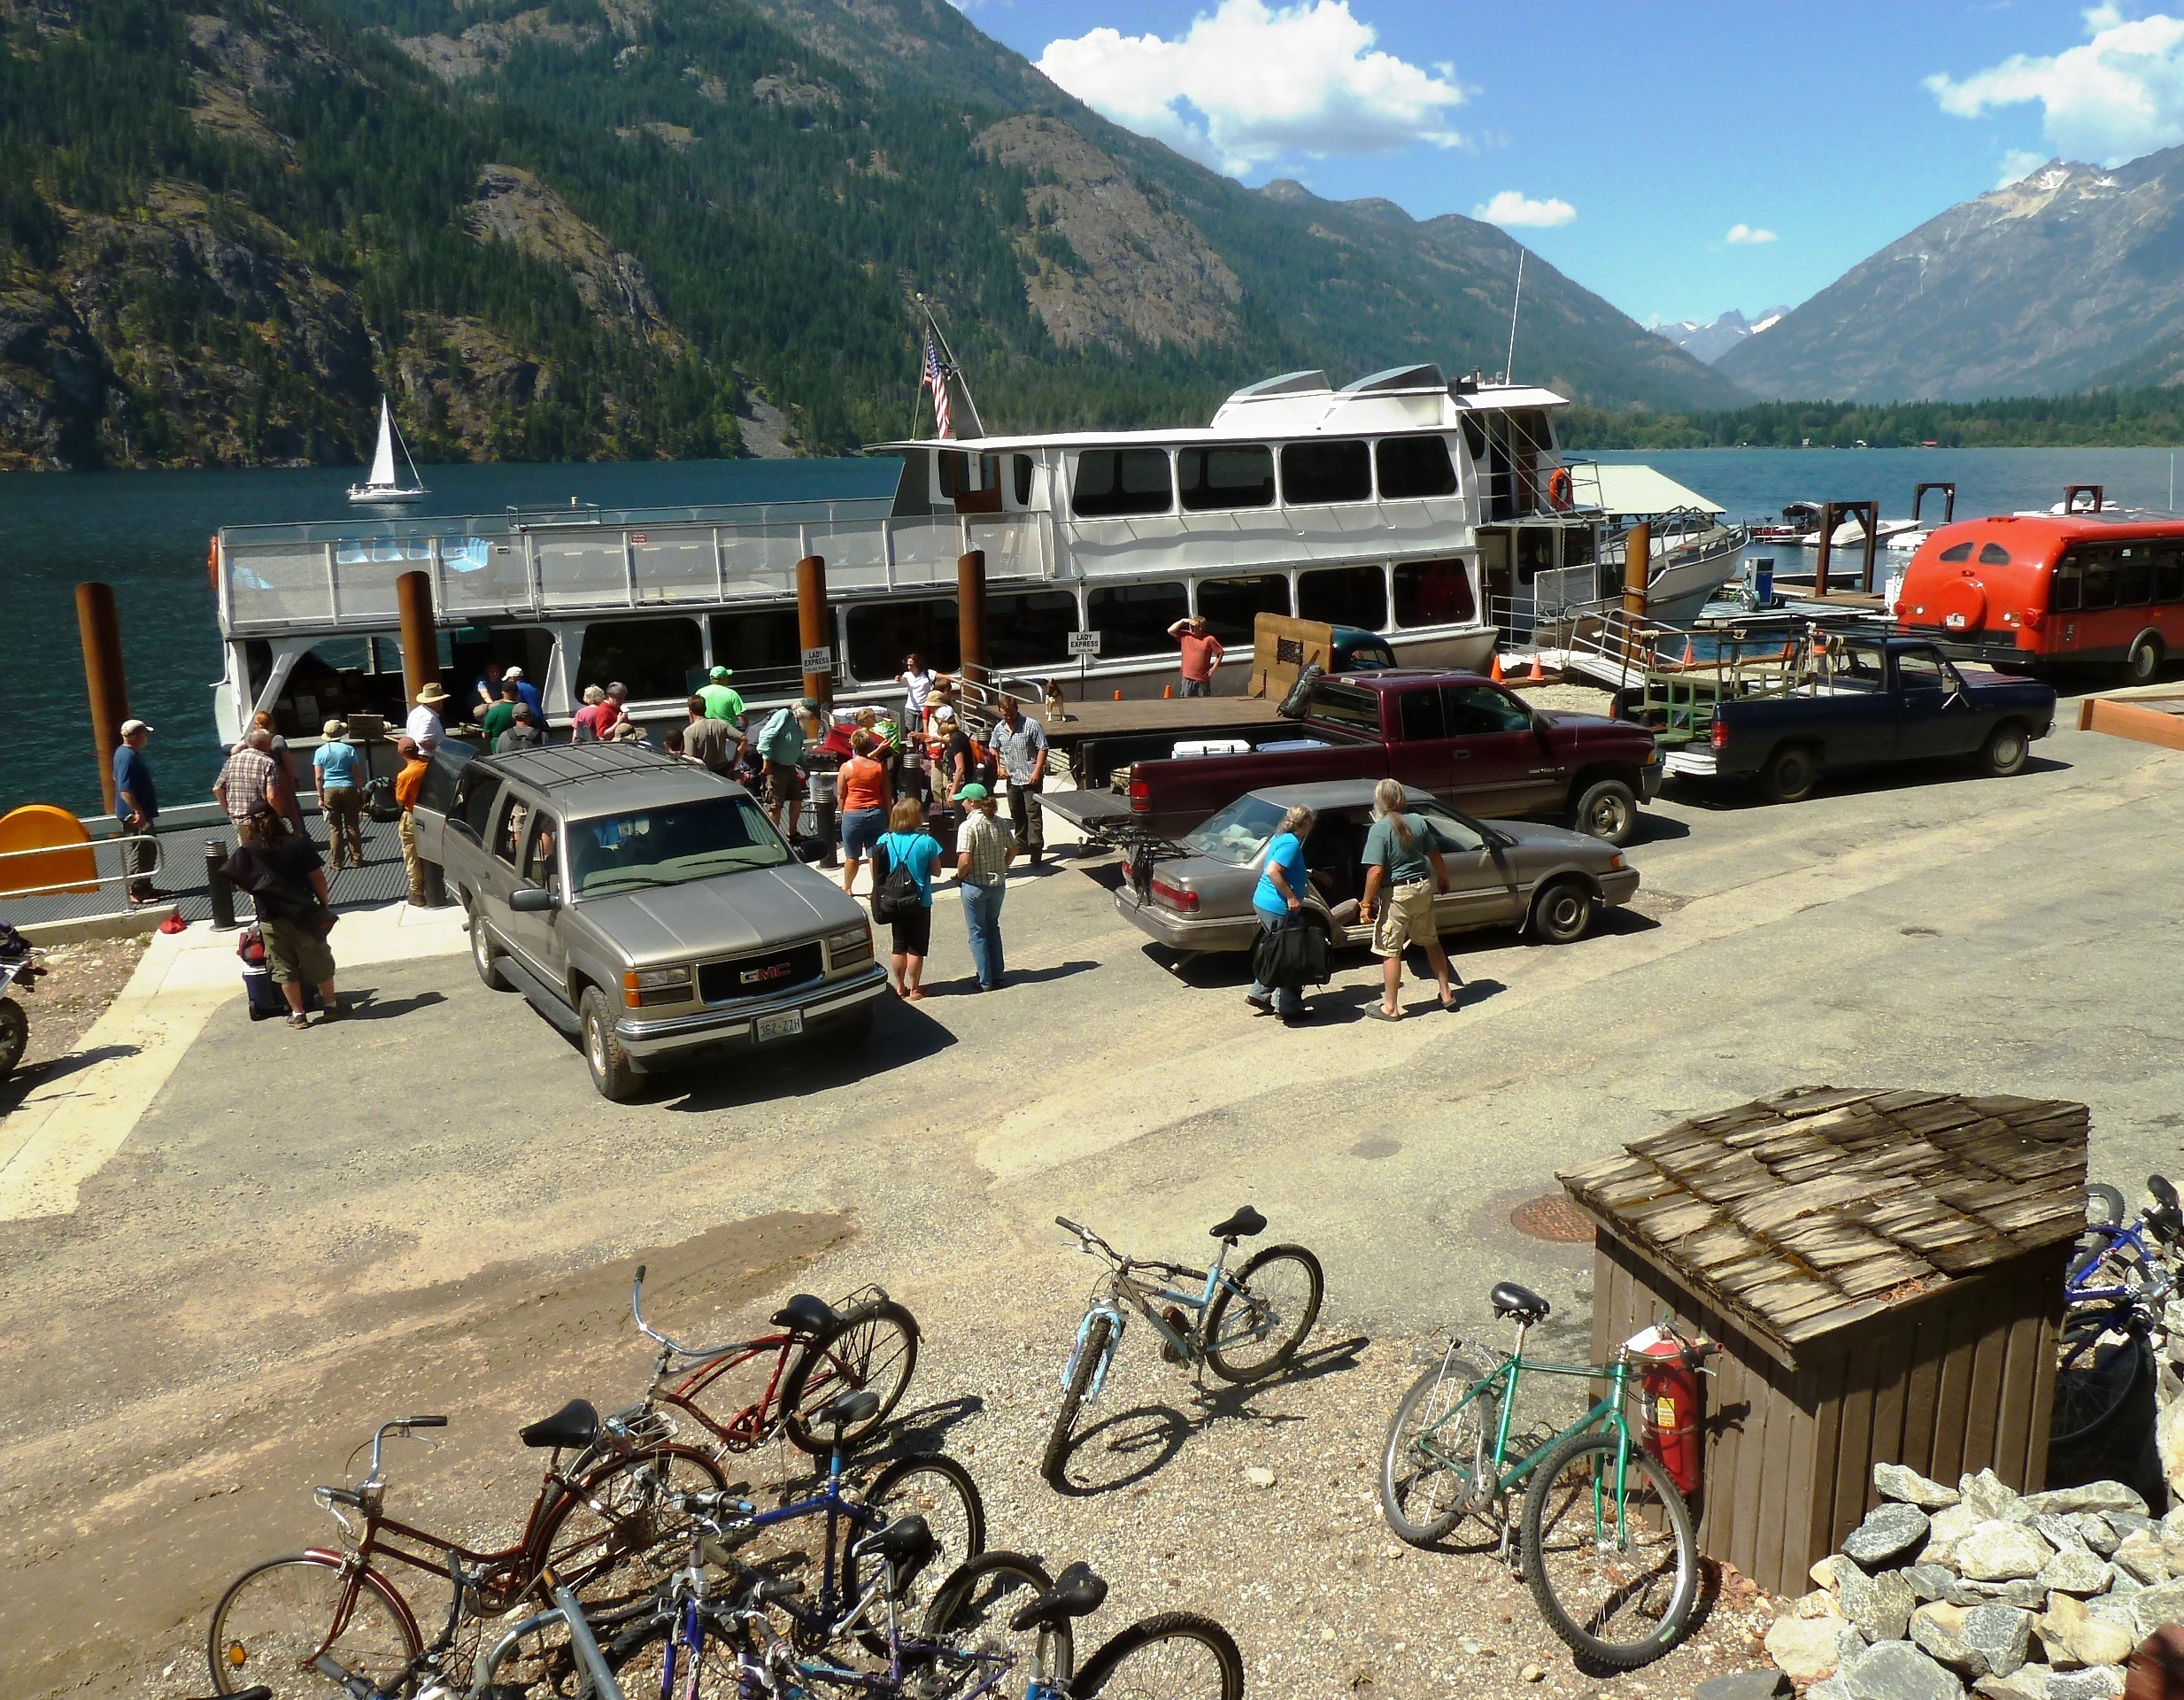 A large silver passenger ferry unloads people at a landing with cars and bikes parked